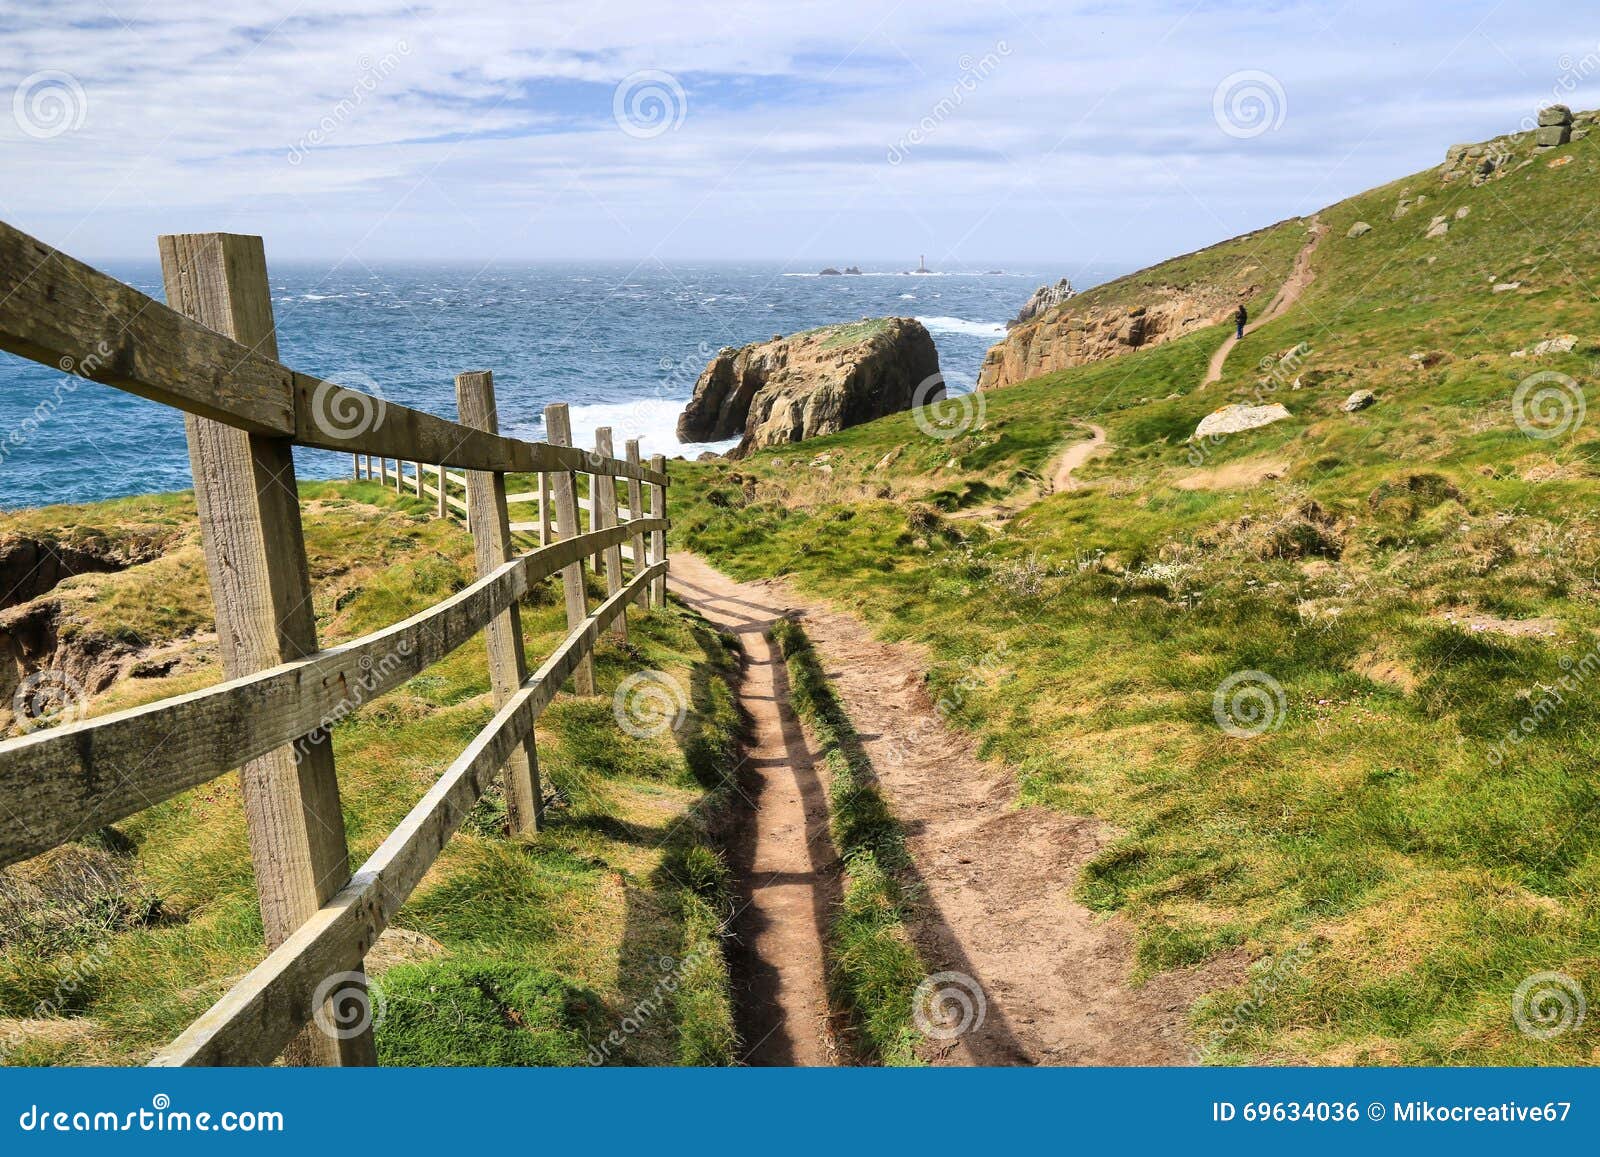 lands end cornwall england